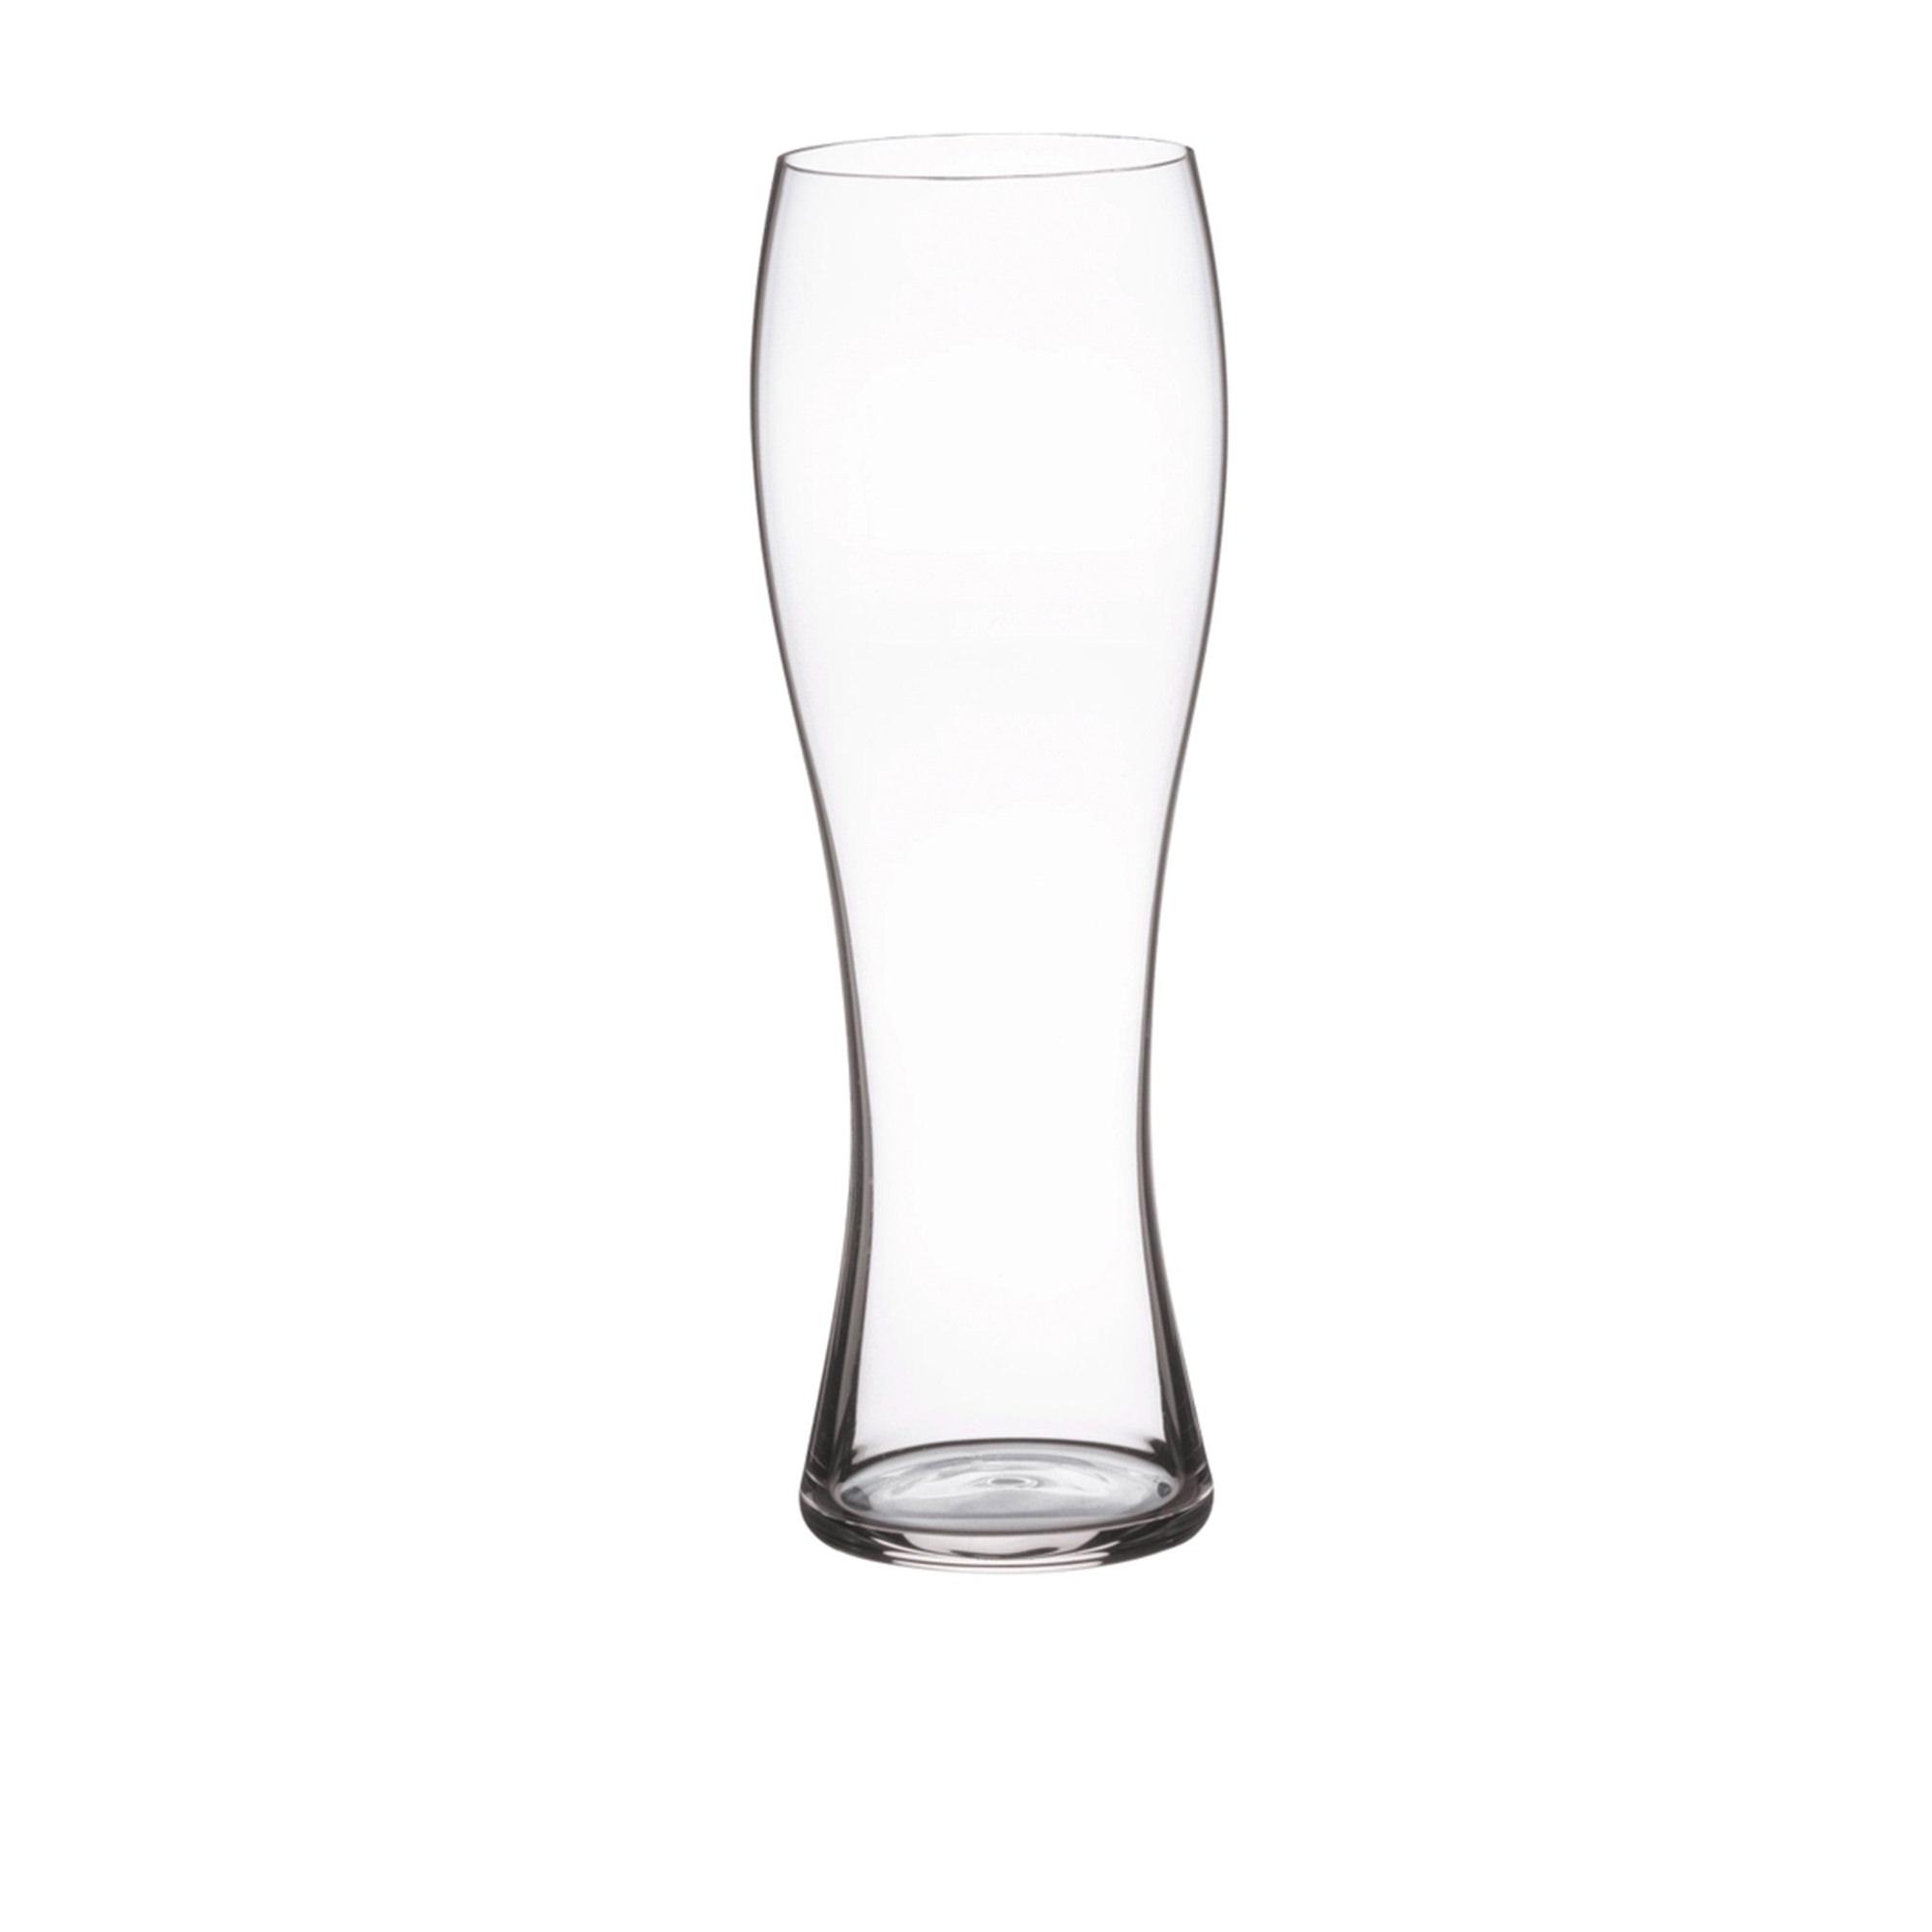 Spiegelau Beer Classics Wheat Beer Glass 700ml Set of 4 Image 4